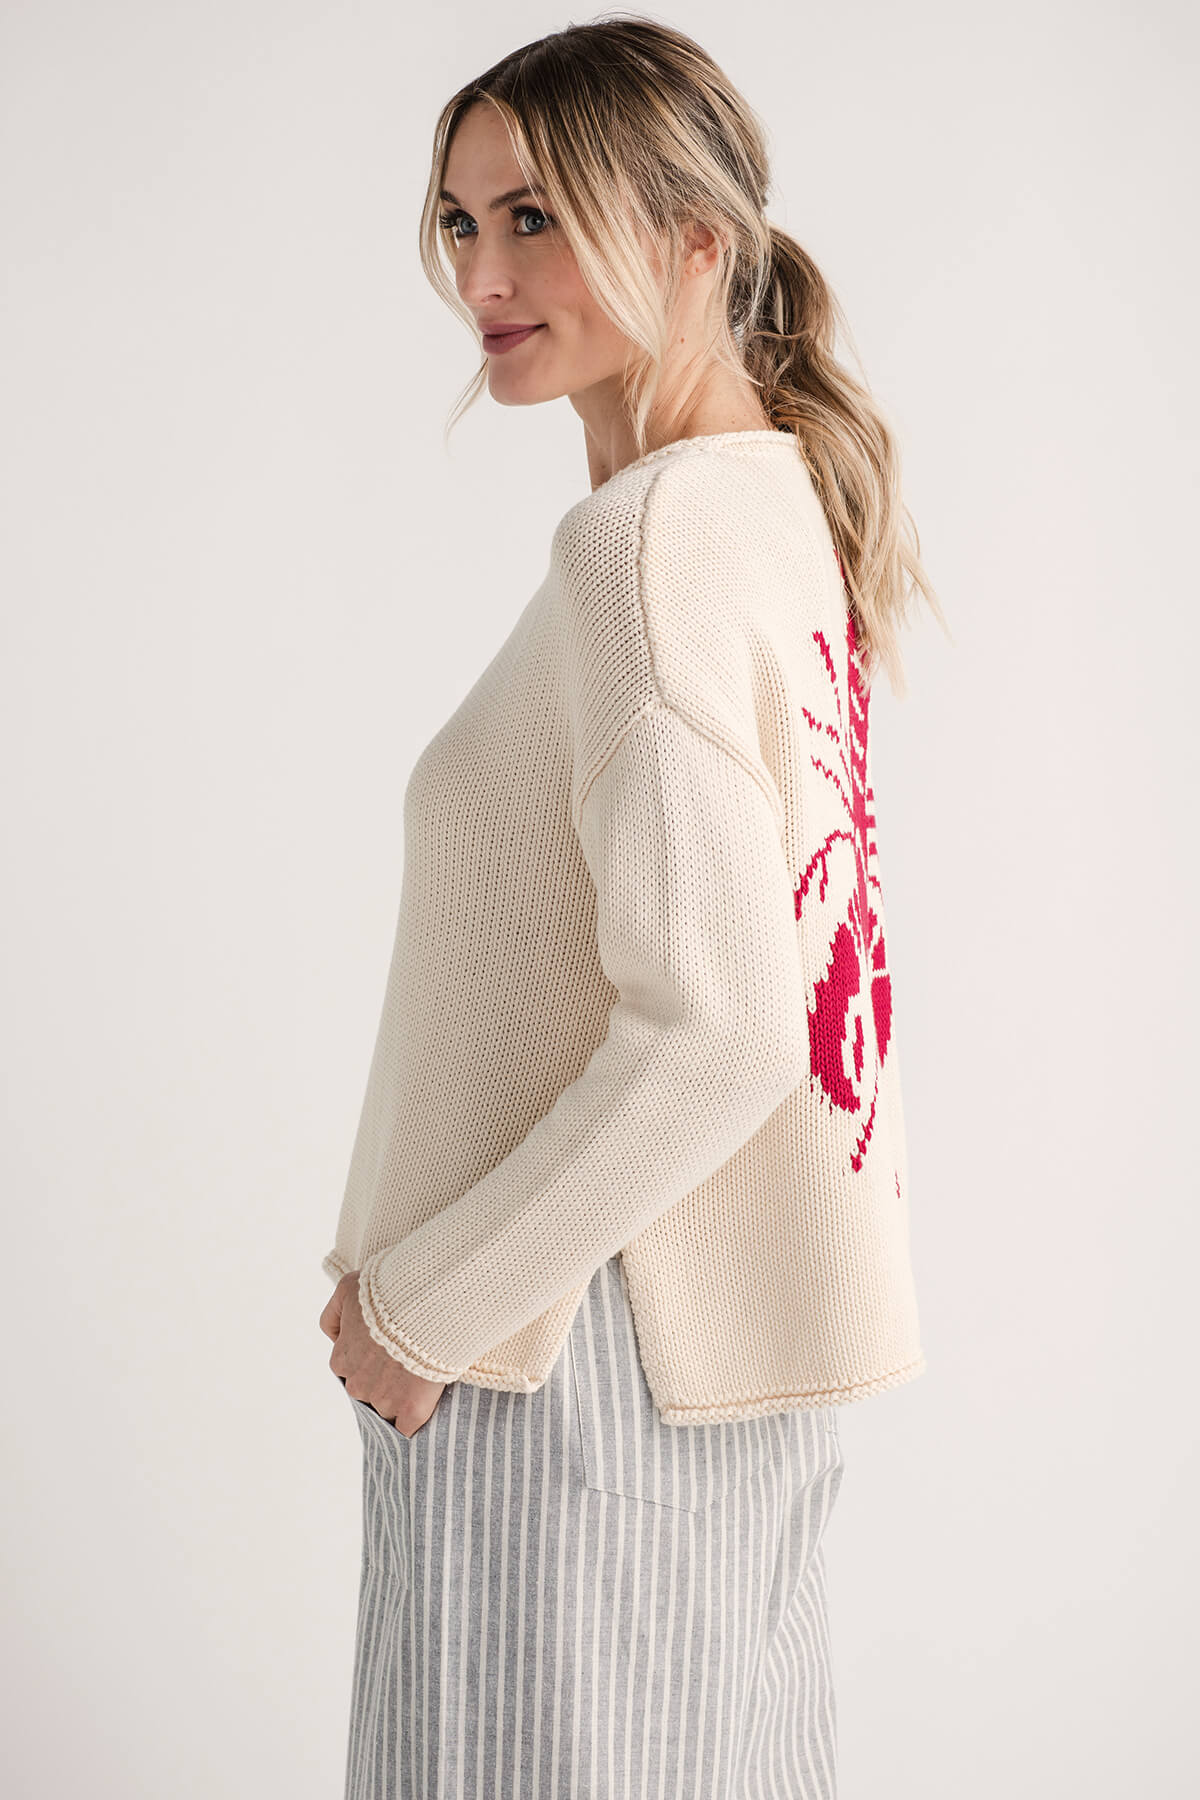 Pink Pineapple Rollneck Lobster Boxy Sweater